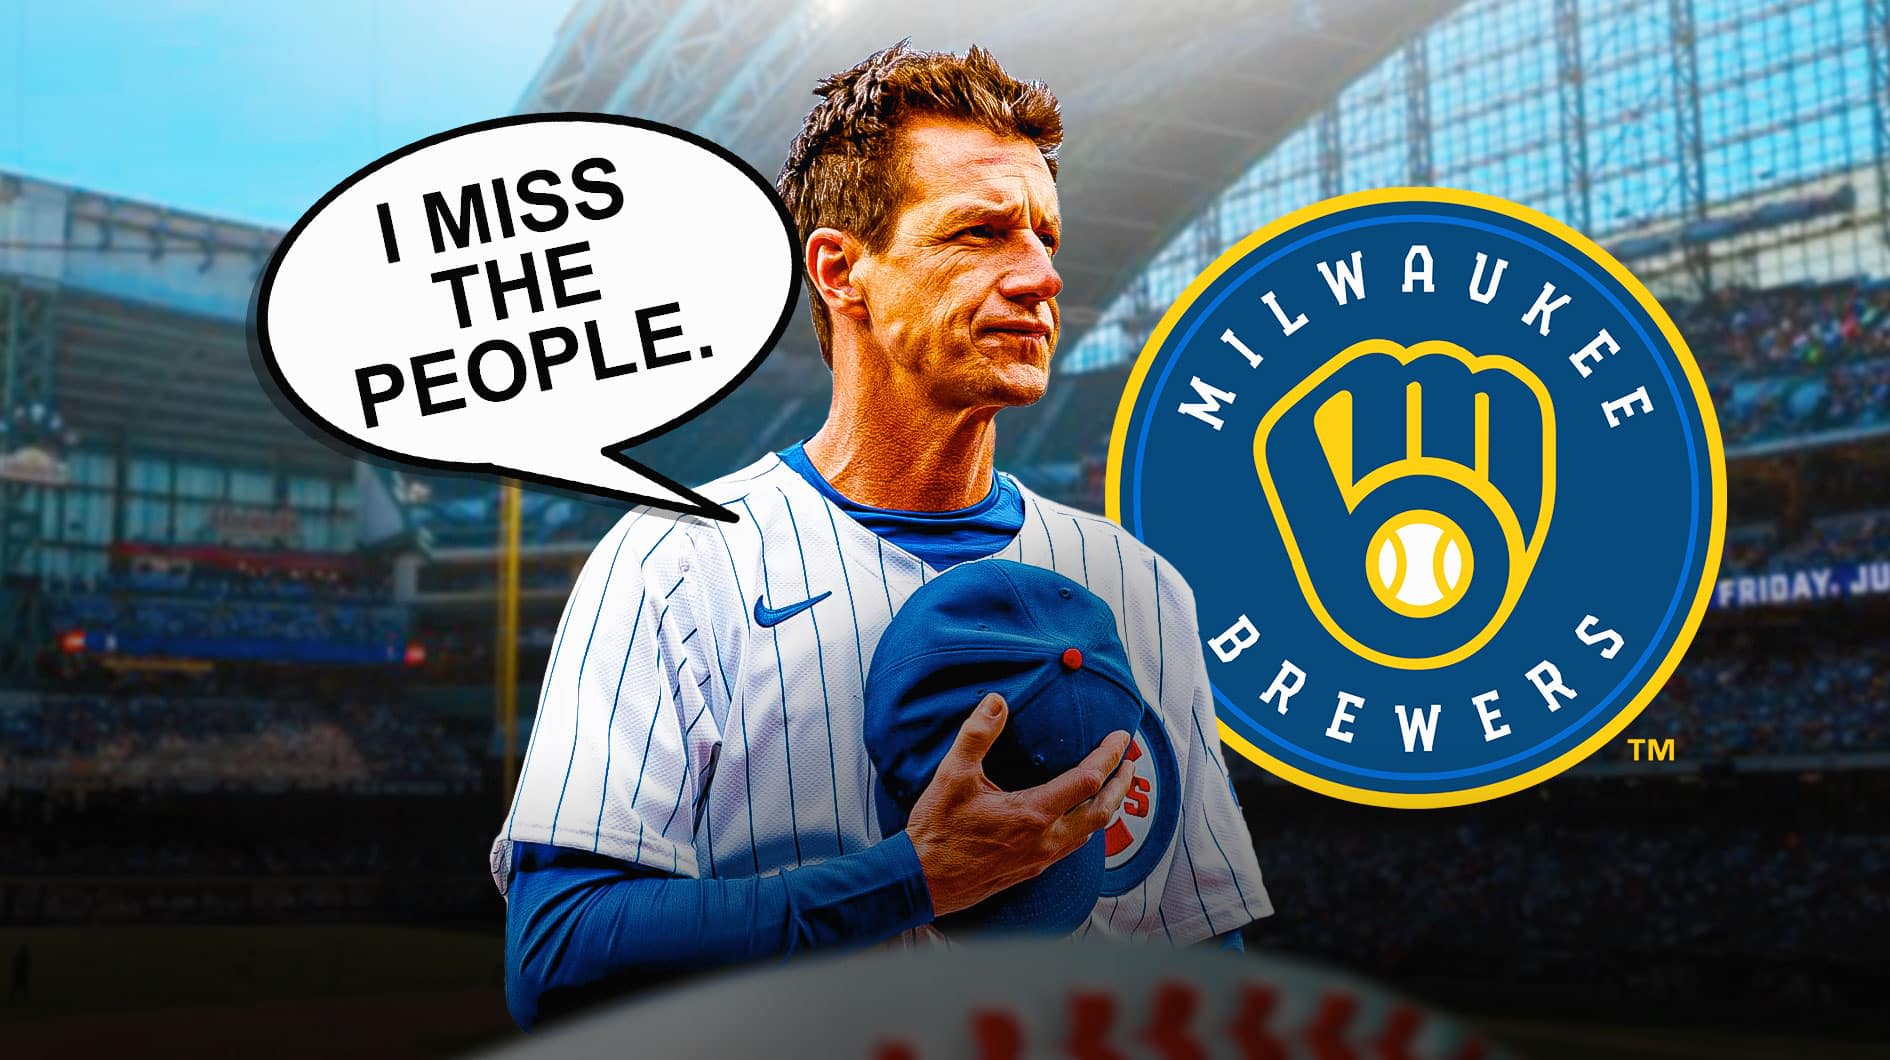 Cubs' Craig Counsell gets real on Milwaukee return ahead of Brewers series